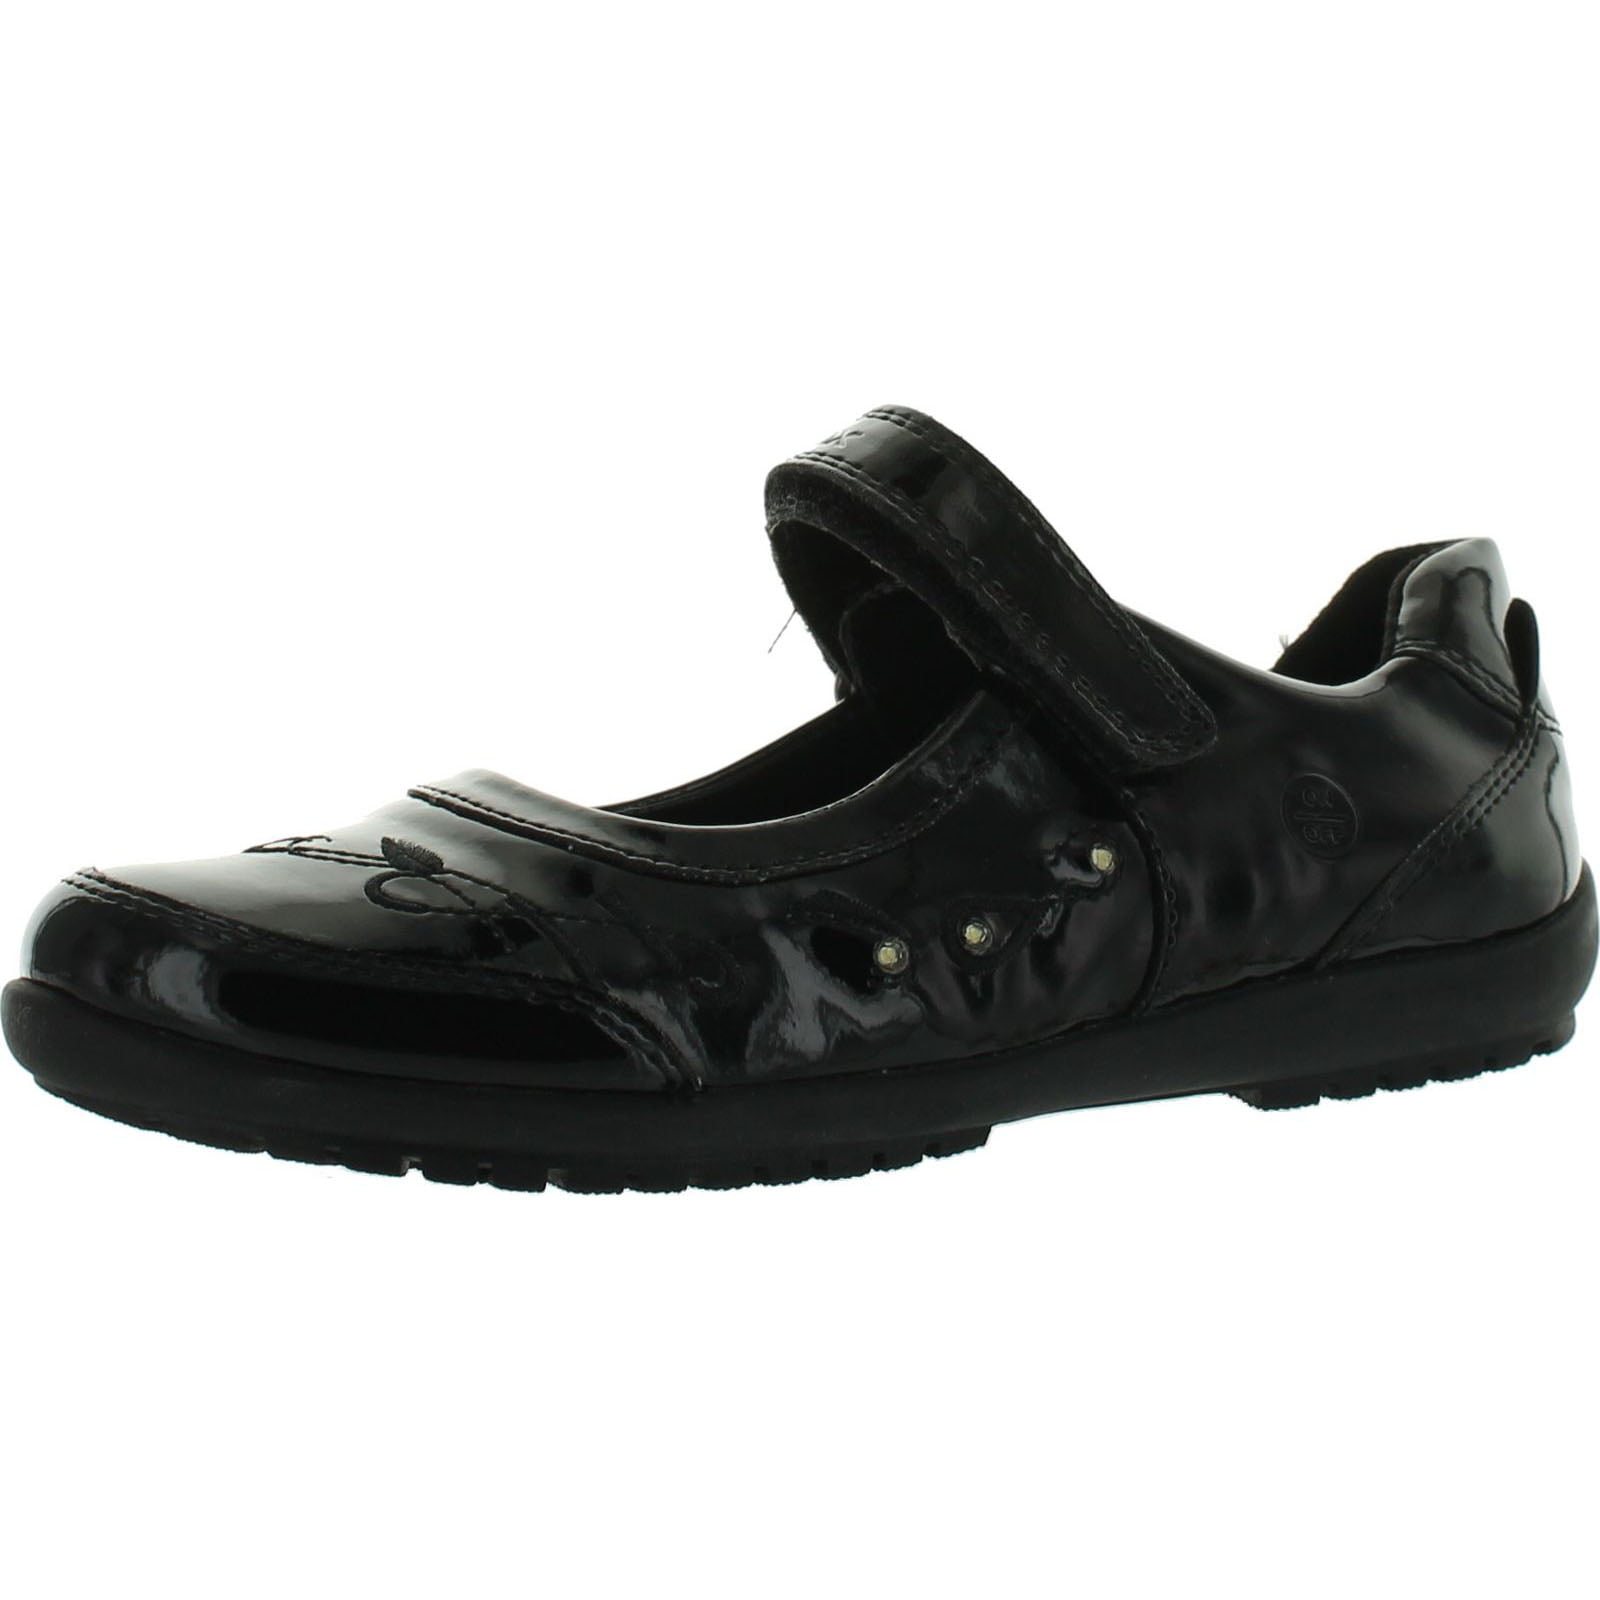 GIRLS PATENT BLACK CASUAL SCHOOL SHOES,STRAP FASTENING SIZES 8-2 KELLY 